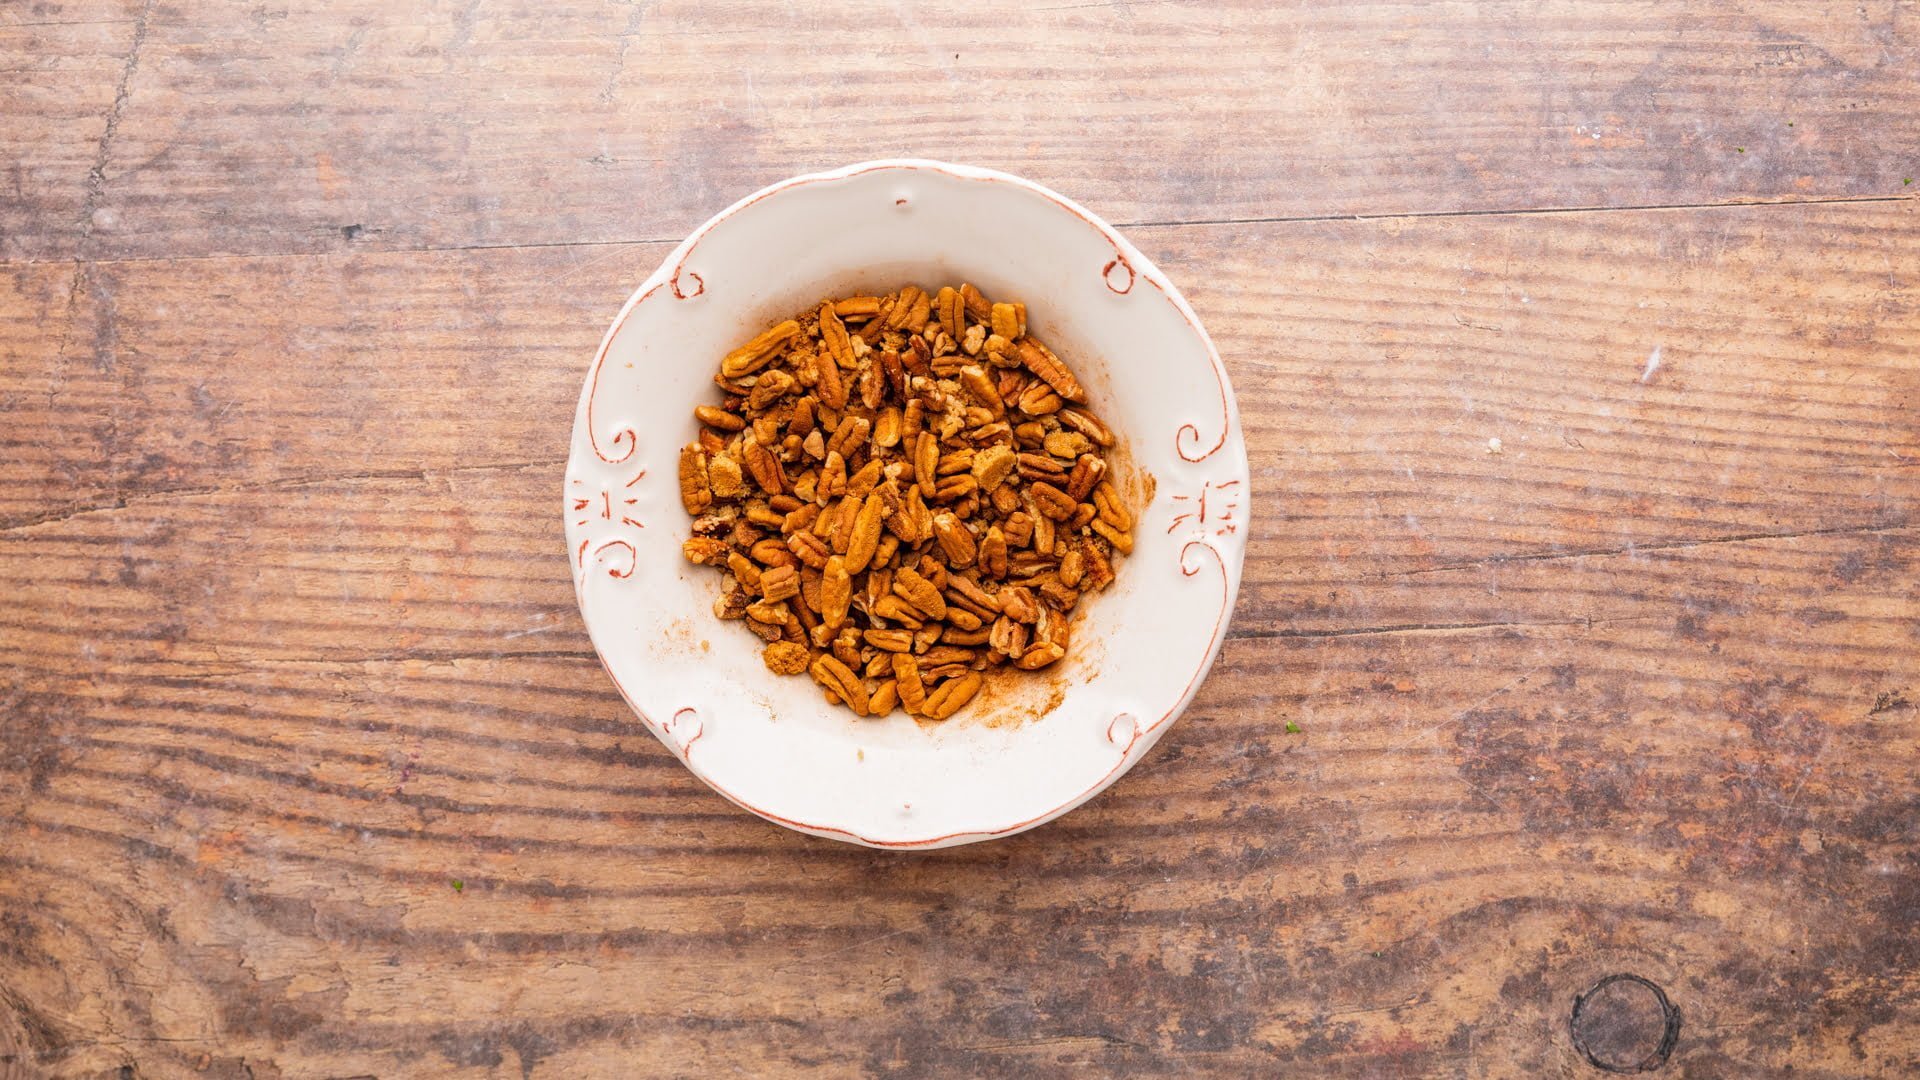 Mix the chopped pecans, brown sugar, cinnamon, and nutmeg in a medium bowl until combined.